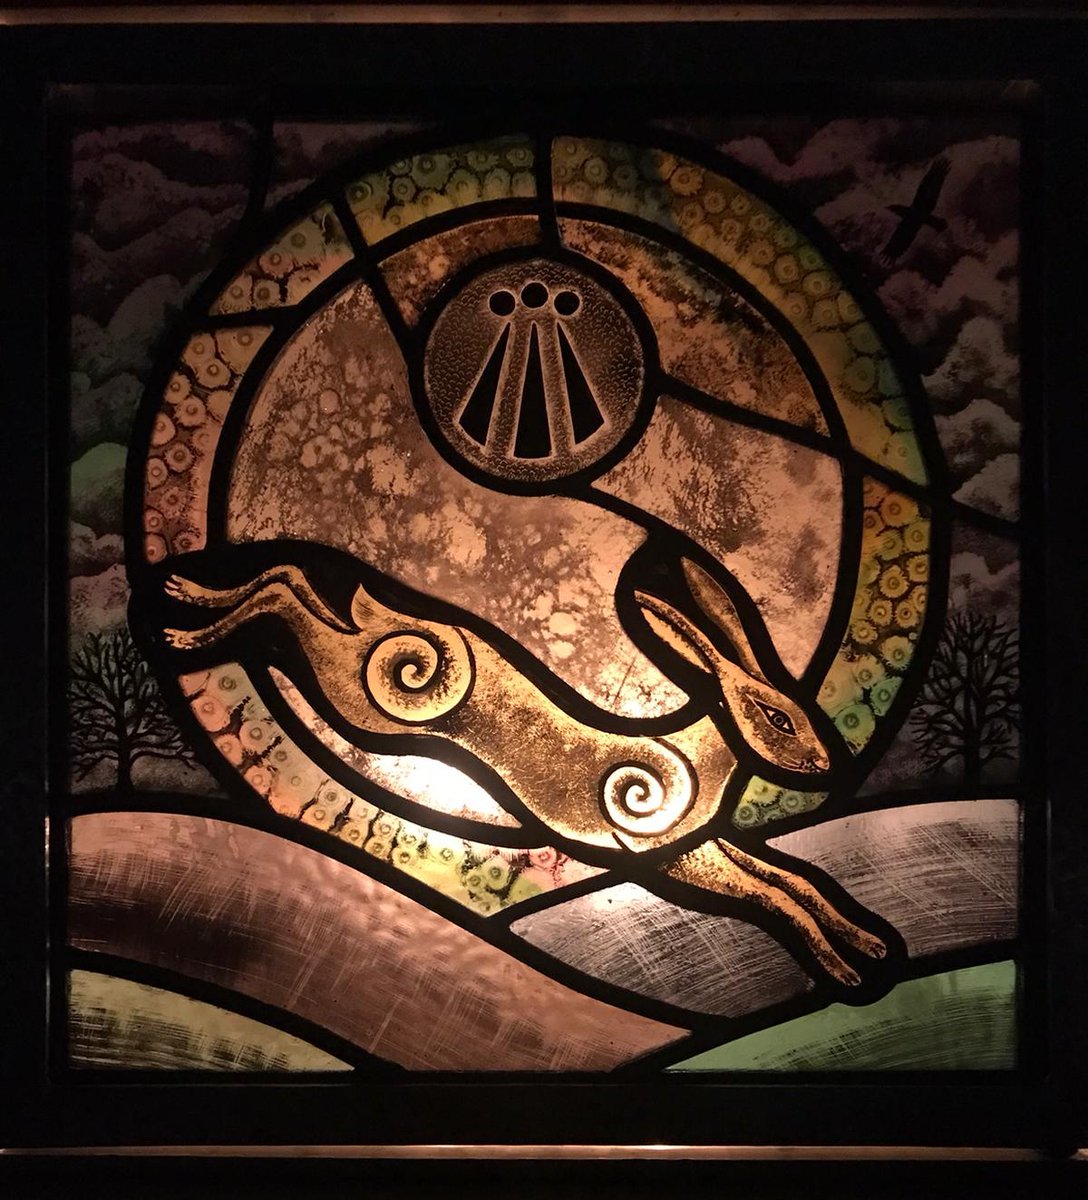 An new, extraordinary and beautiful pannel of #stained glass by Harriet Love in #soultonlongbarrow This will be a monument to a life when the time comes.